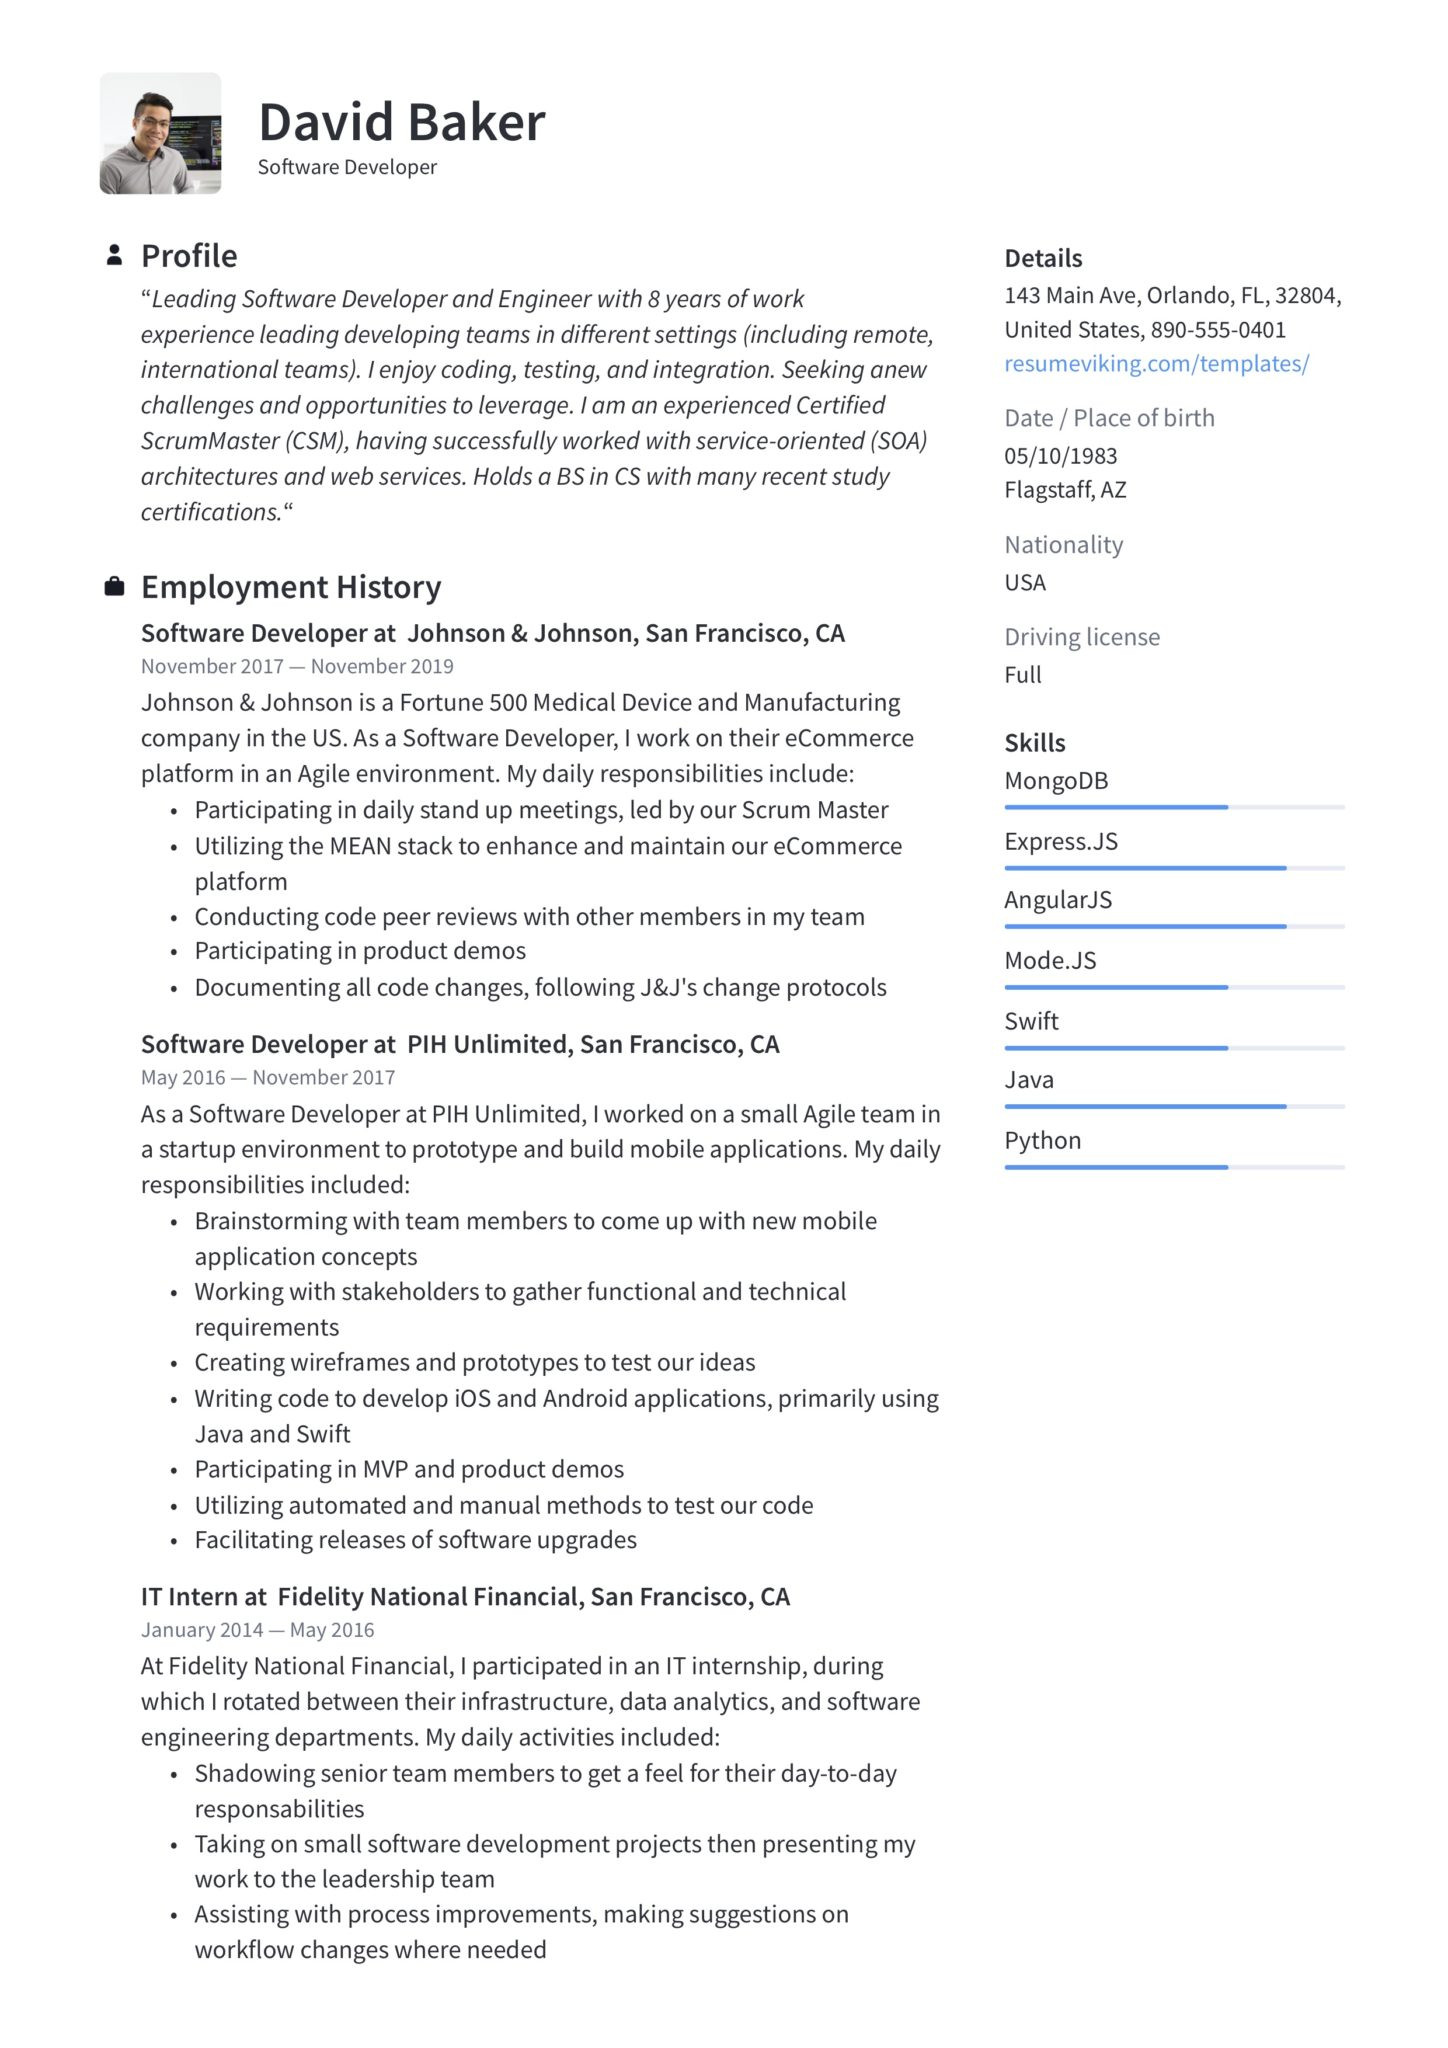 Sample Resume for software Engineer with 4 Years Experience Guide: software Developer Resume  19 Examples Word & Pdf 2020